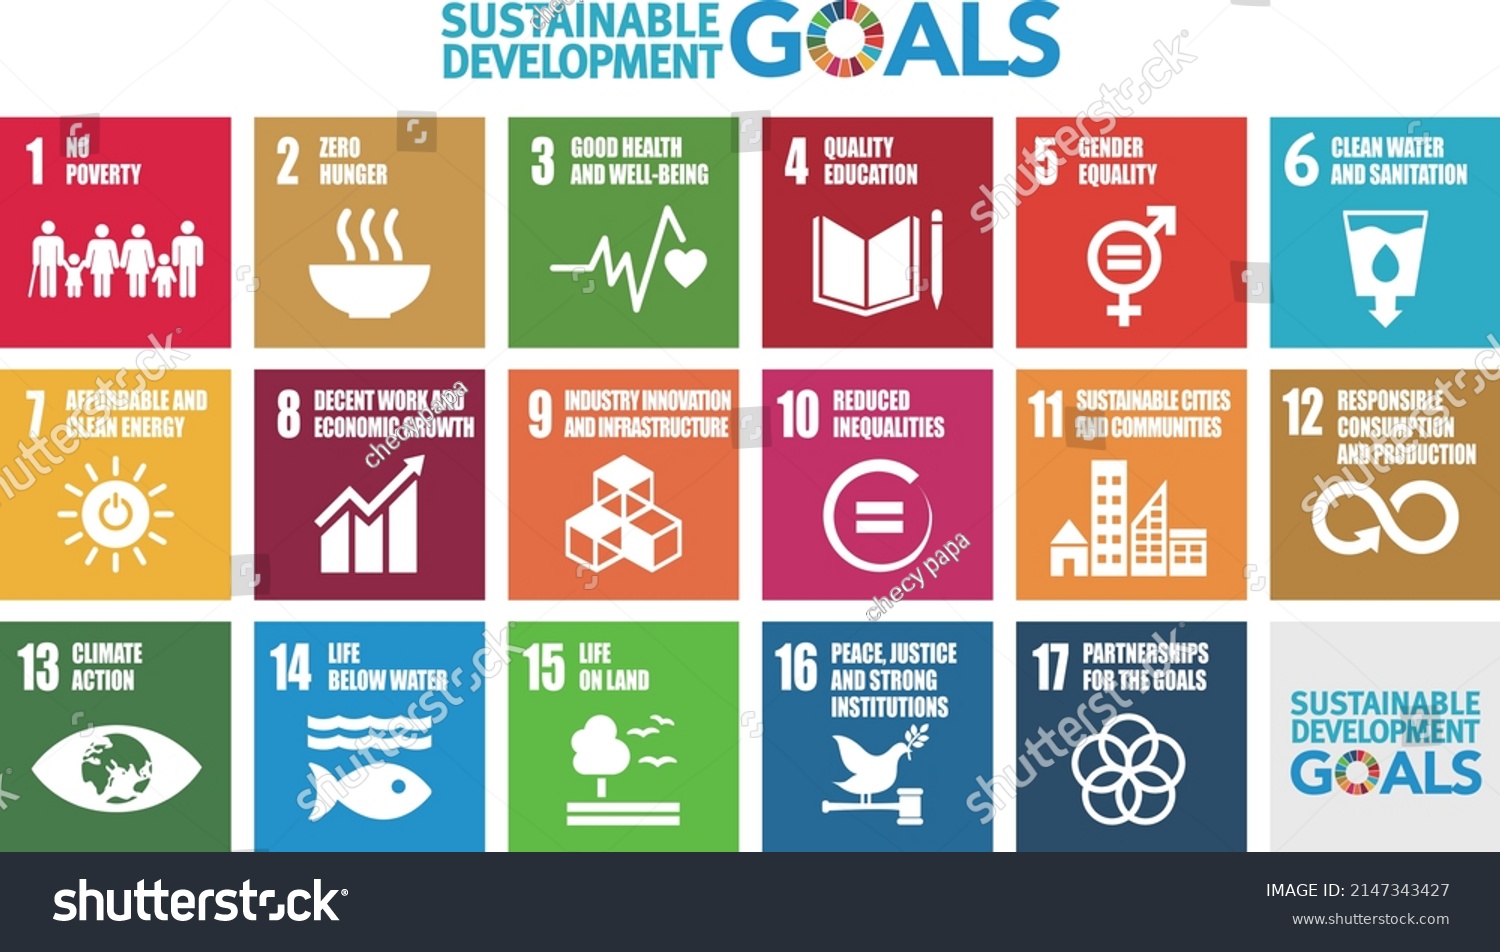 Goals for addressing poverty worldwide and realizing sustainable development. SDGs #2147343427